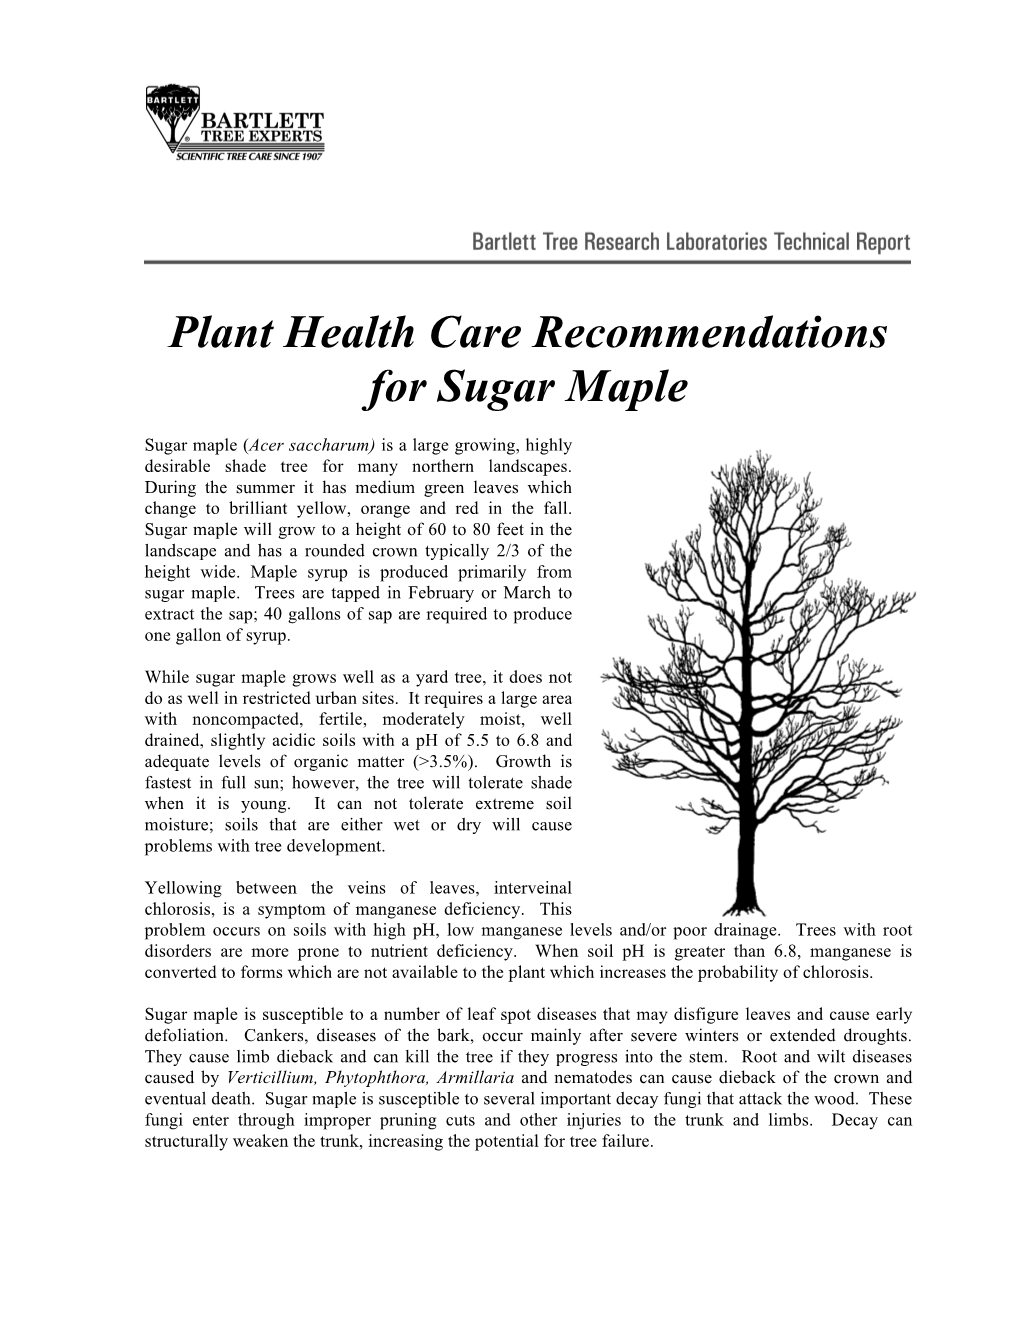 Plant Health Care Recommendations for Sugar Maple